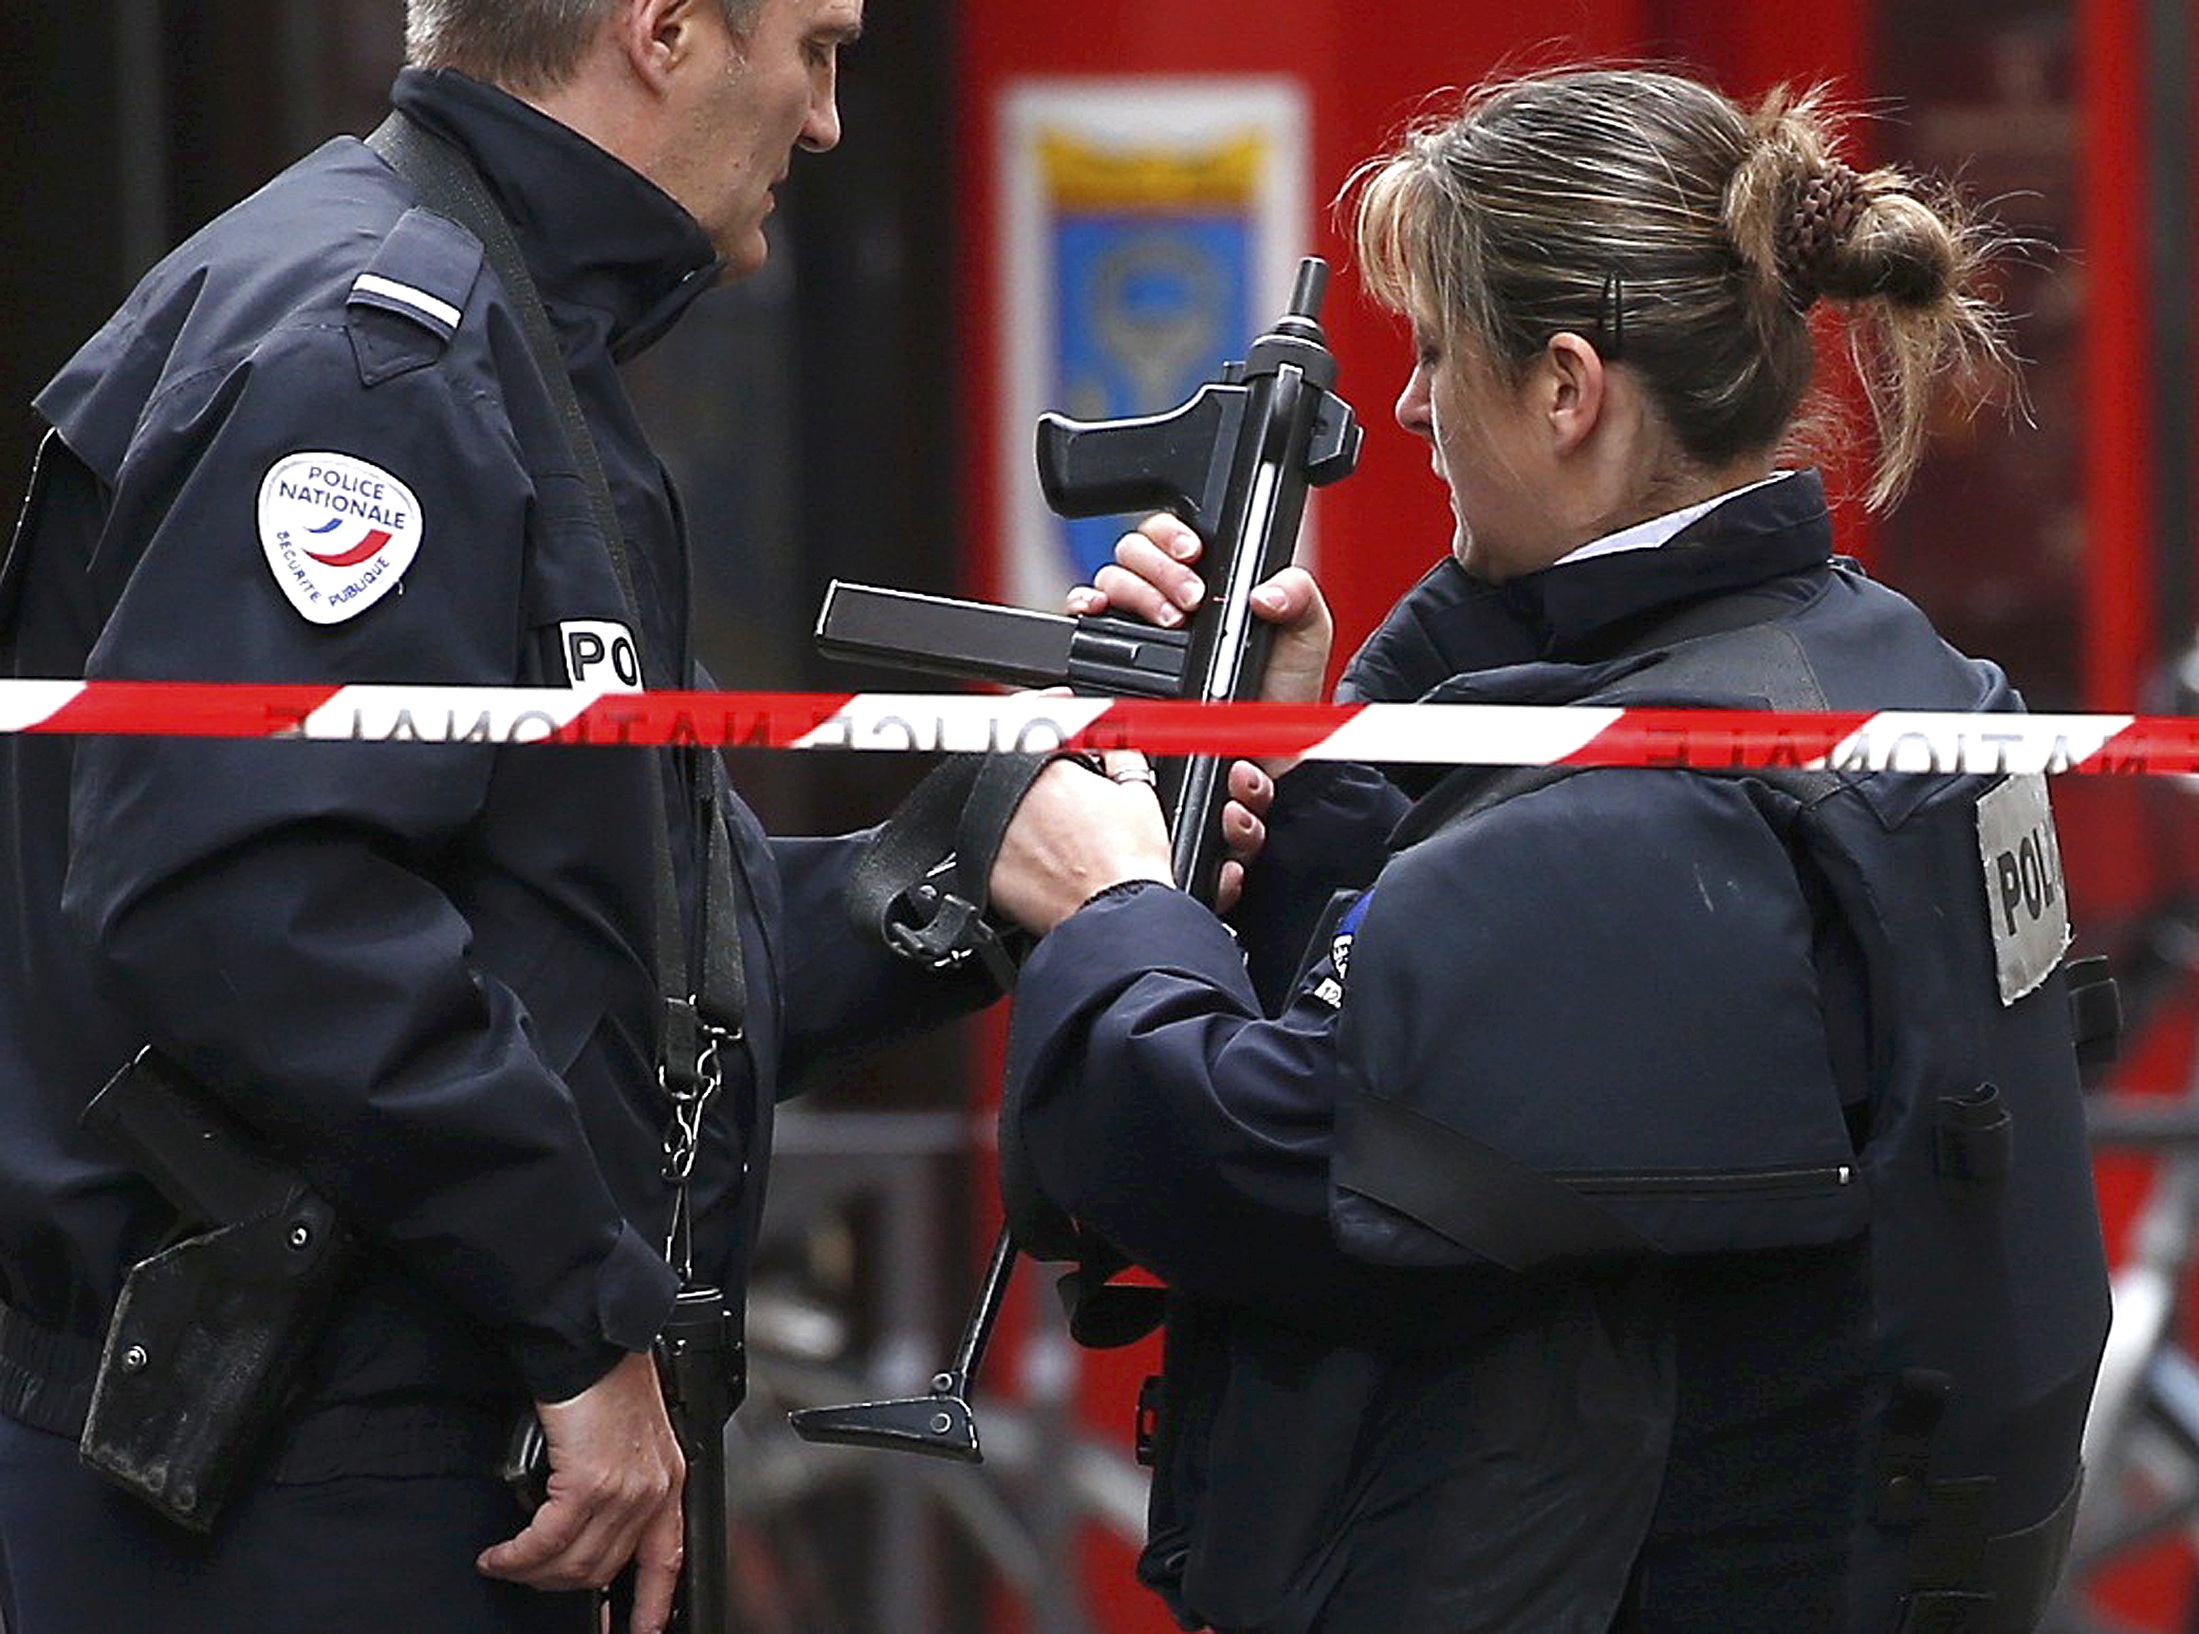 Police officers stands guard at the scene of a shooting the day after a series of deadly attacks in Paris